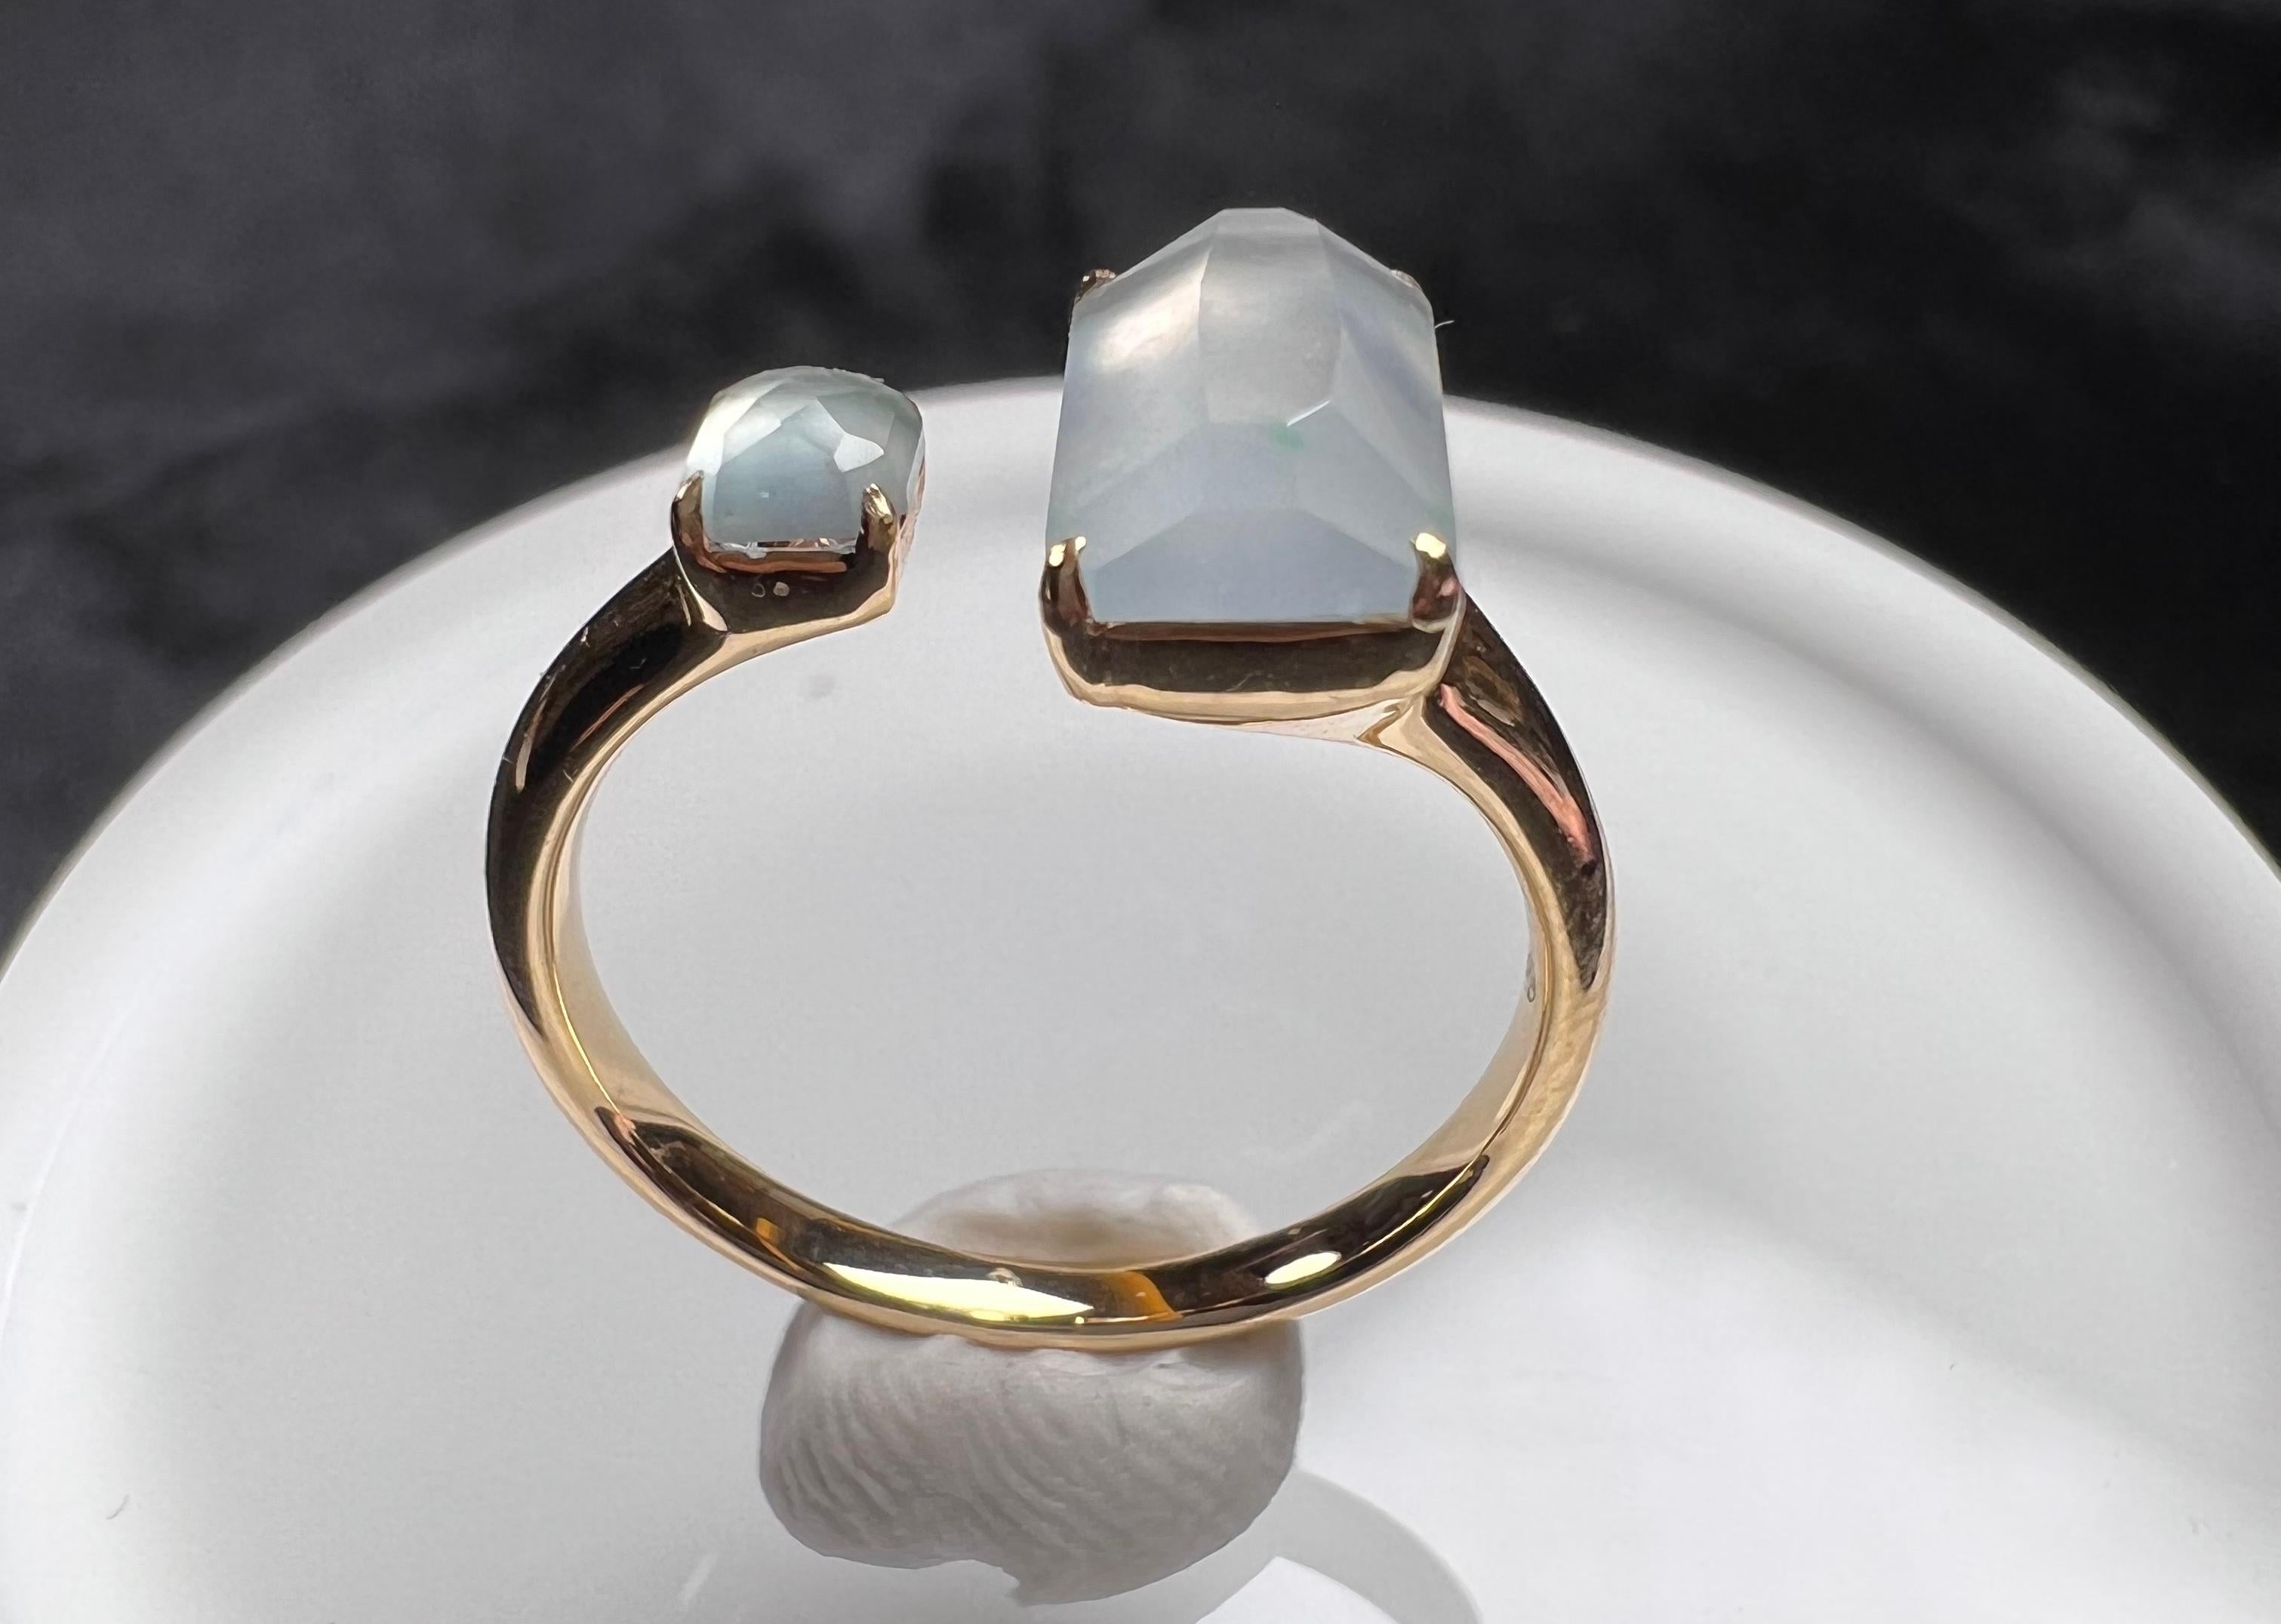 18K Yellow Gold Icy Jadeite Toi et Moi Ring, Engagement Ring 

Total weight (approx.): 3g
Jadeite measurement (approx.): 8.7*5.7mm; 3.7*3.7mm

This ring is resizable.
Get in touch with us to know more details and your shipping options.

The 18K